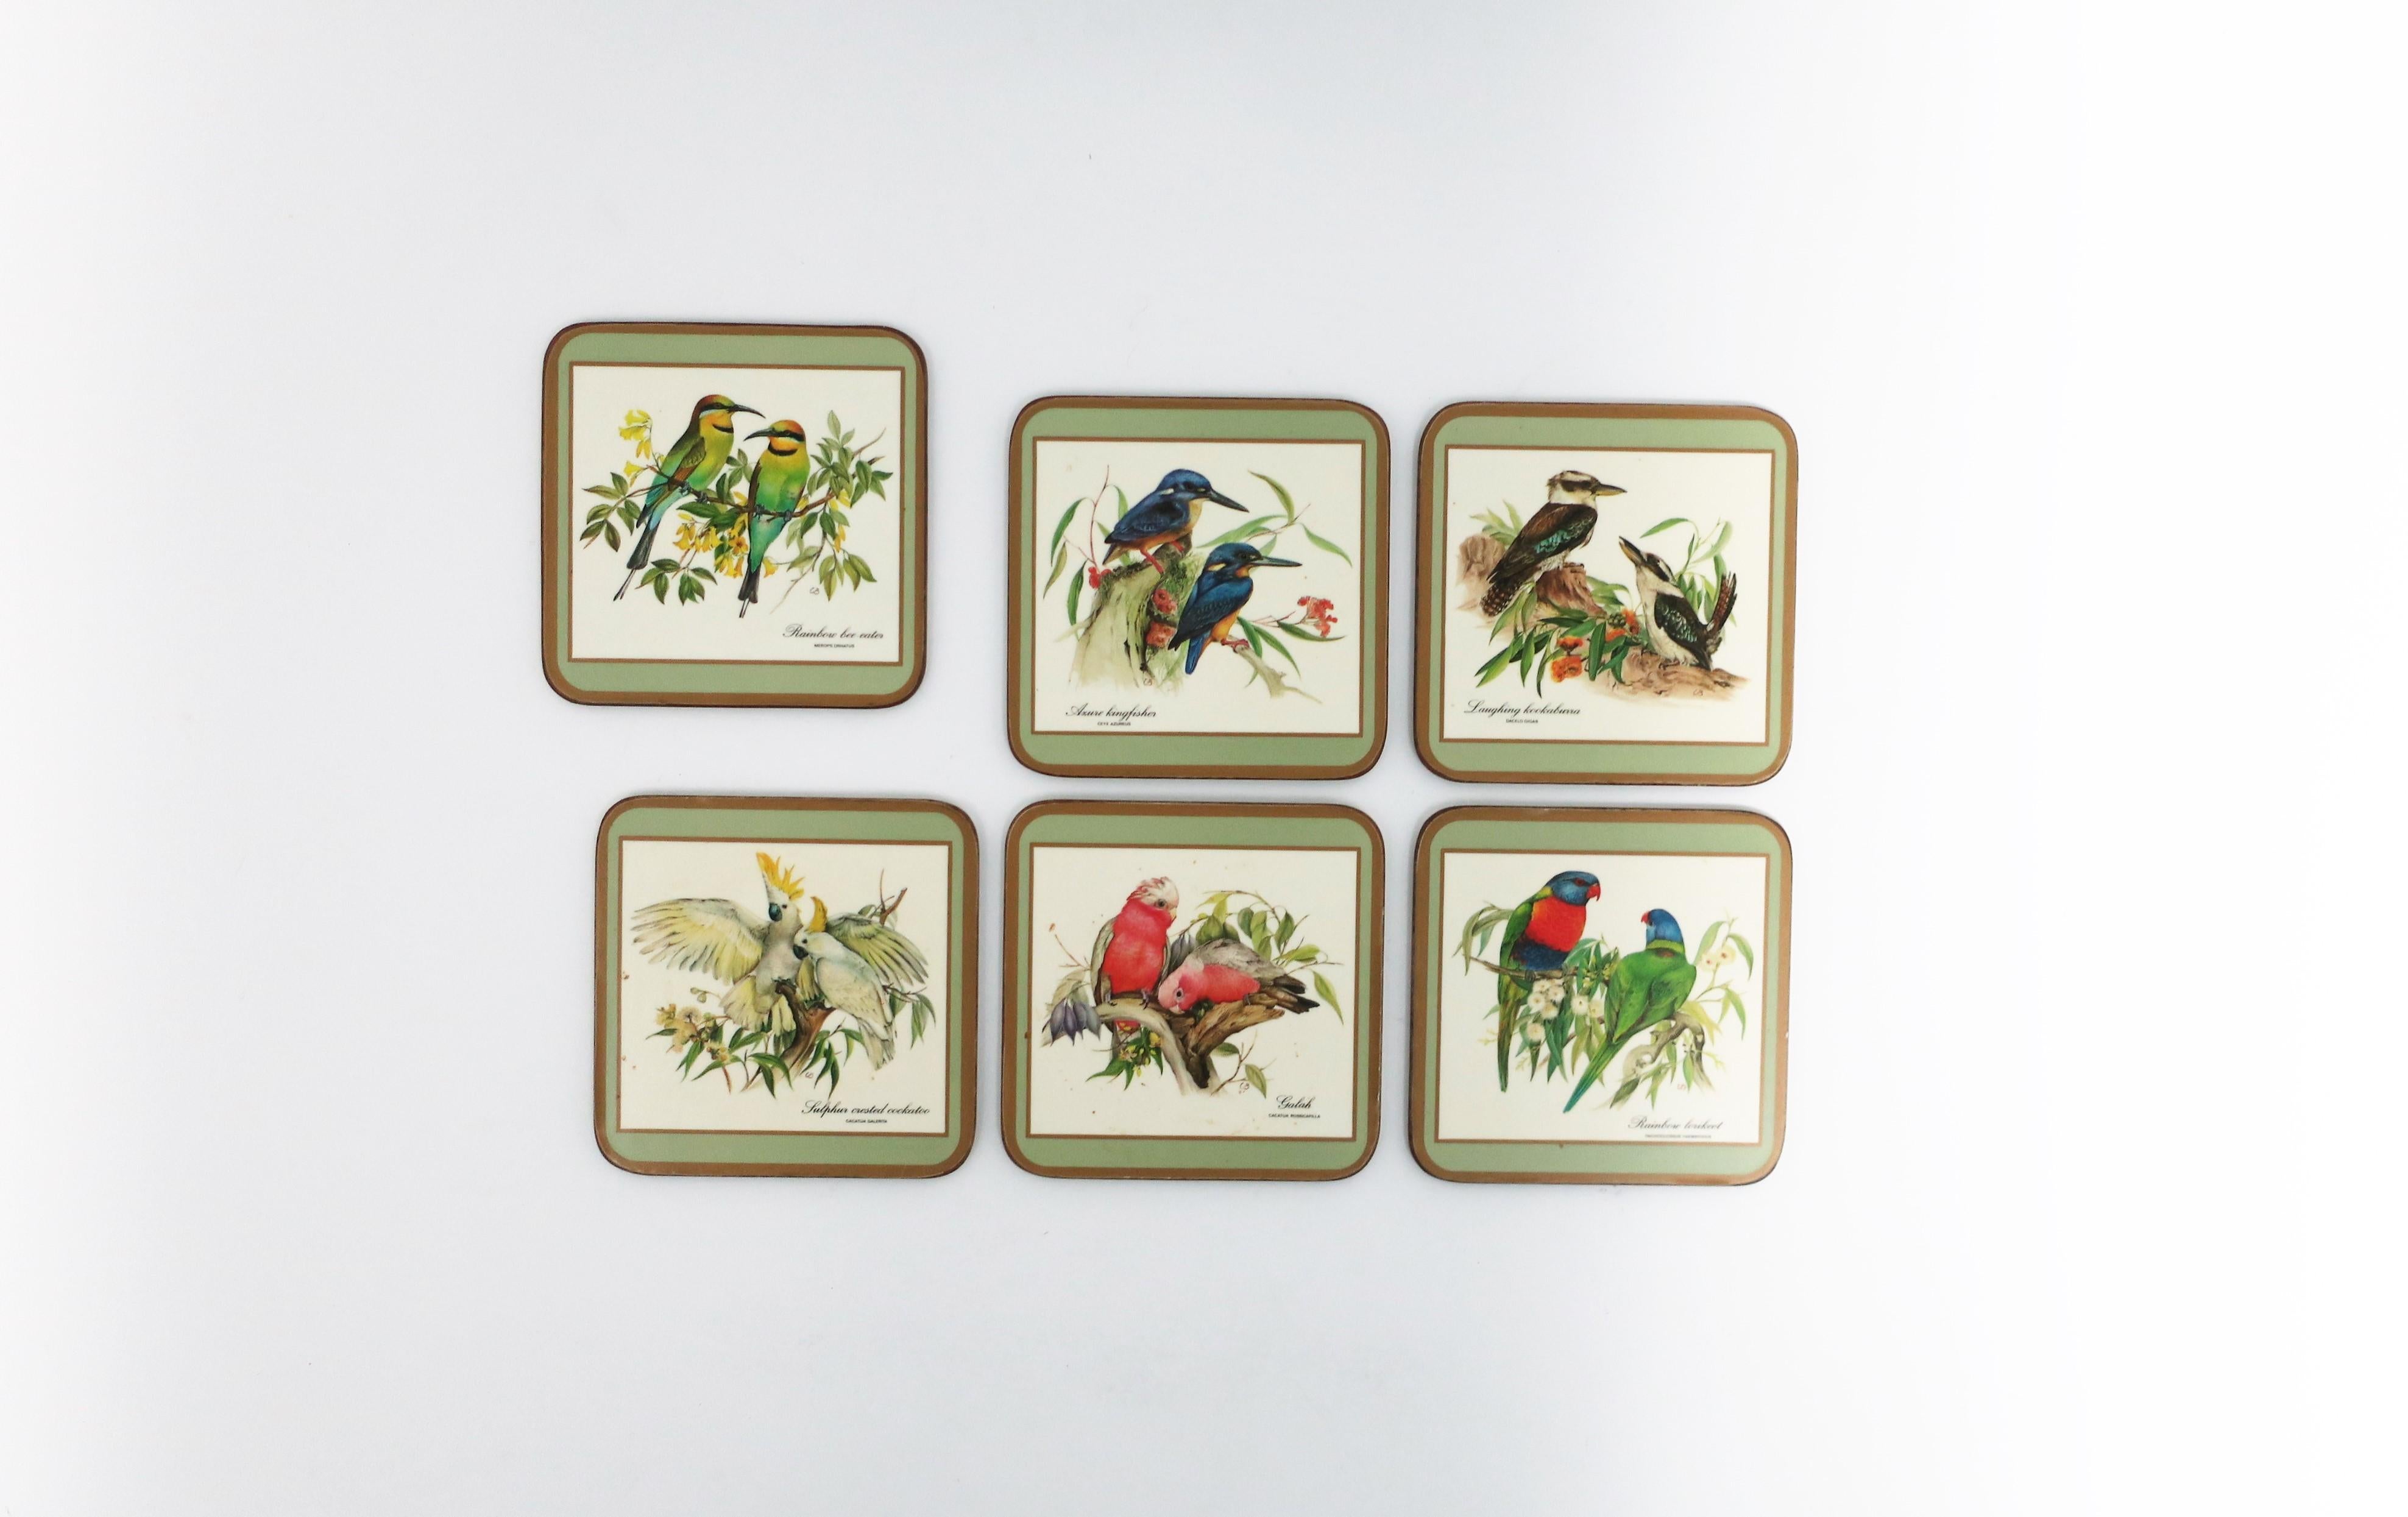 A great set of six (6) vintage cocktail or drink coasters with bird designs, circa late-20th century, England. Beautiful birds with vibrant colors; set features six different designs/birds. A great addition to any bar, bar cart, or entertaining